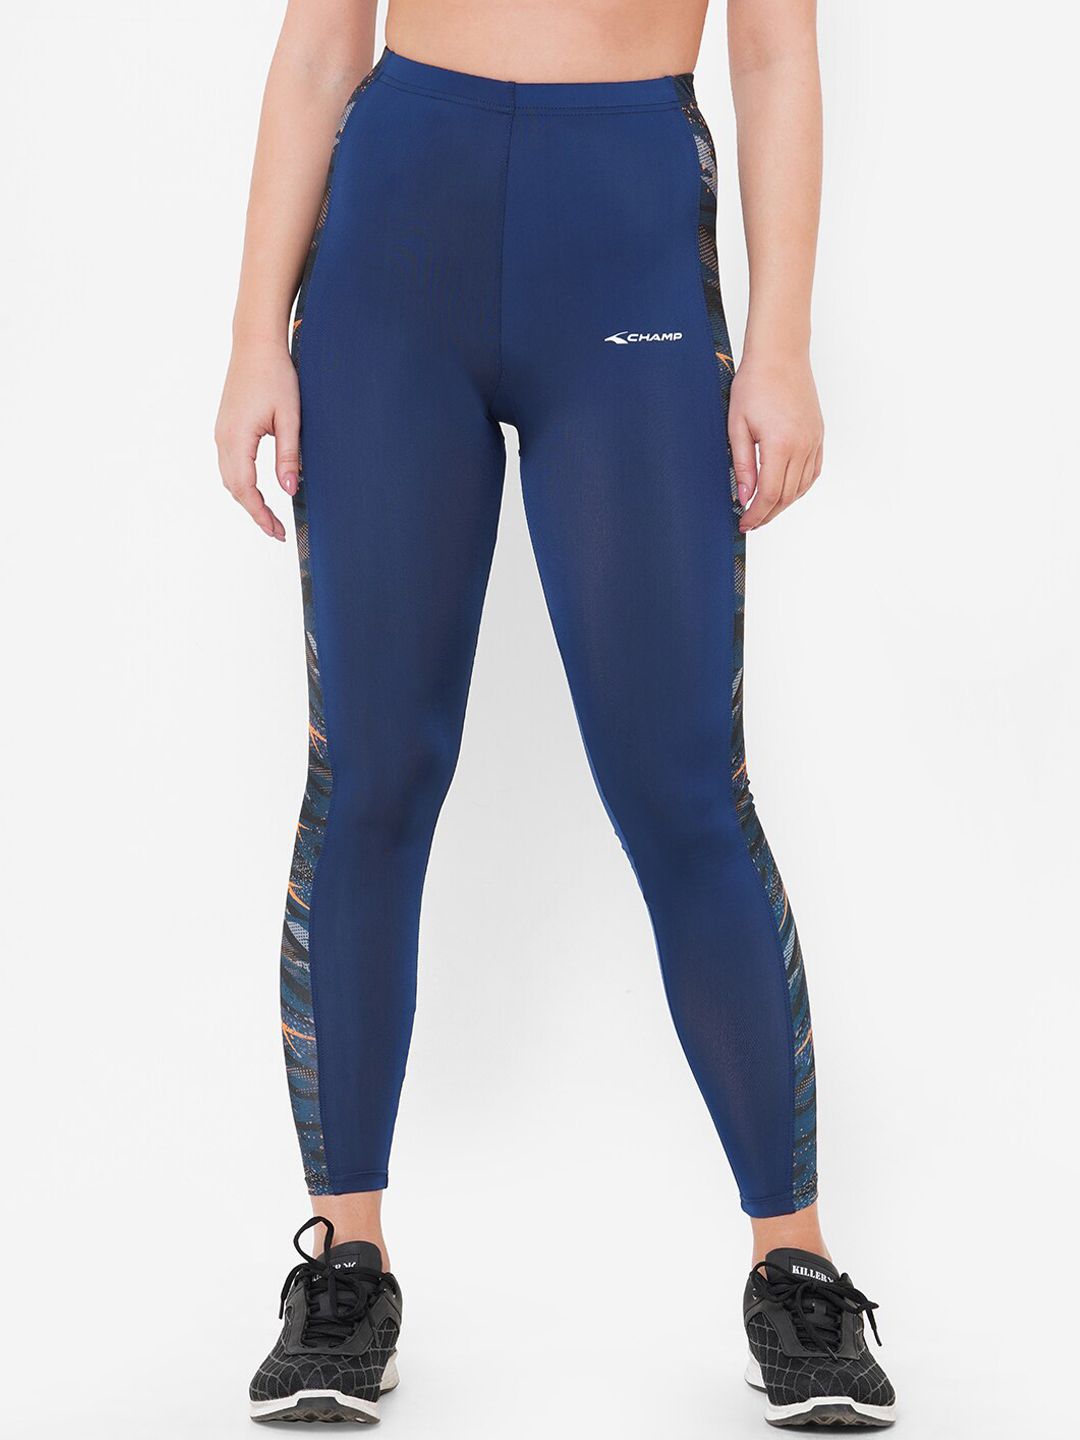 VELOZ Women Blue Skinny Fit Sports Tights With Printed Side Panel Price in India